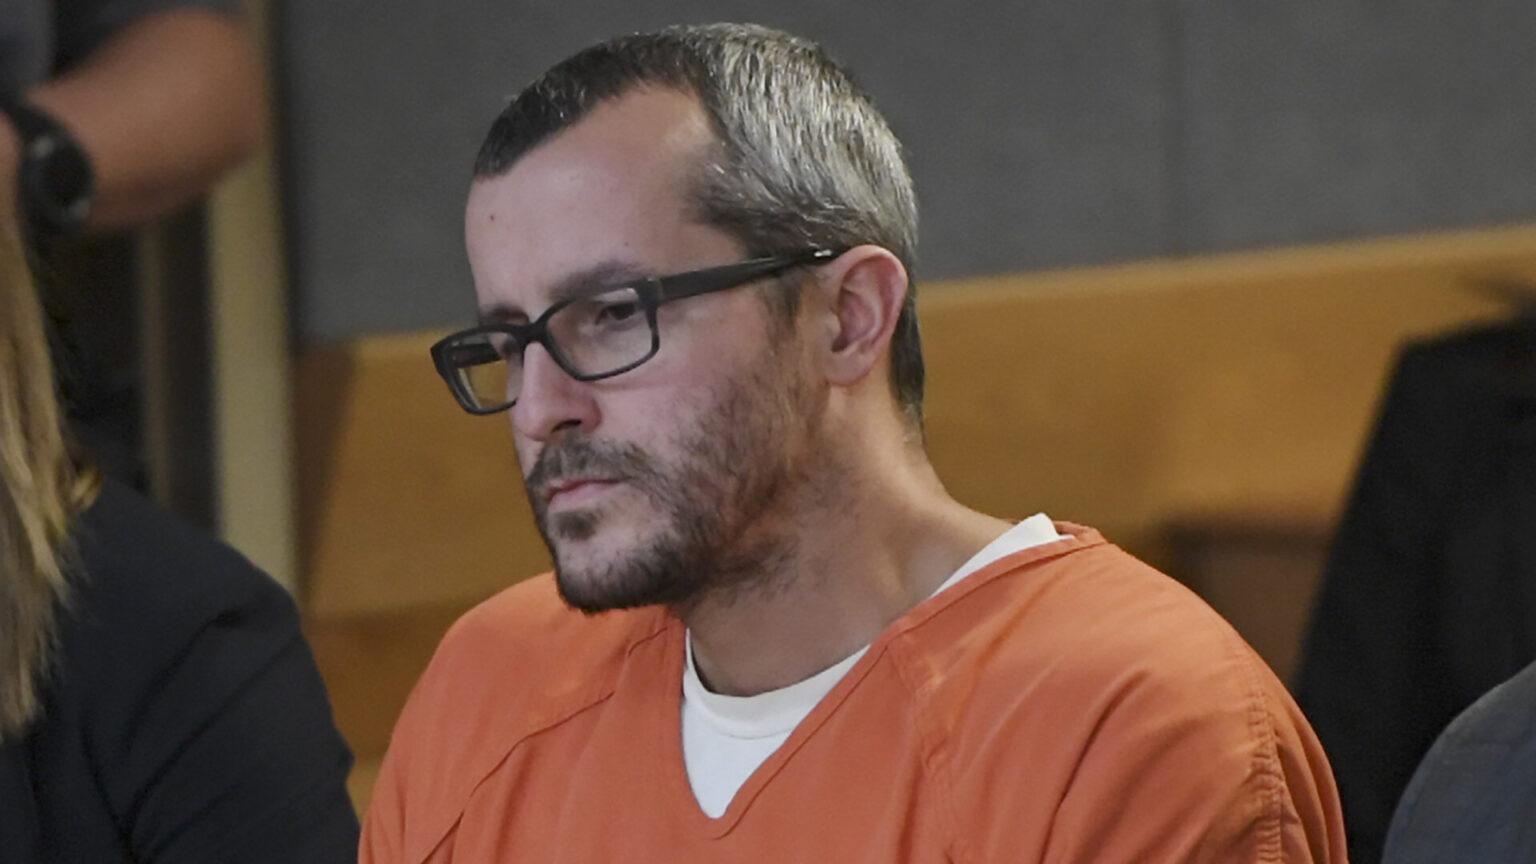 The murderer, Chris Watts, had a girlfriend at the time he committed the murders of his family. Was his girlfriend involved in any way?